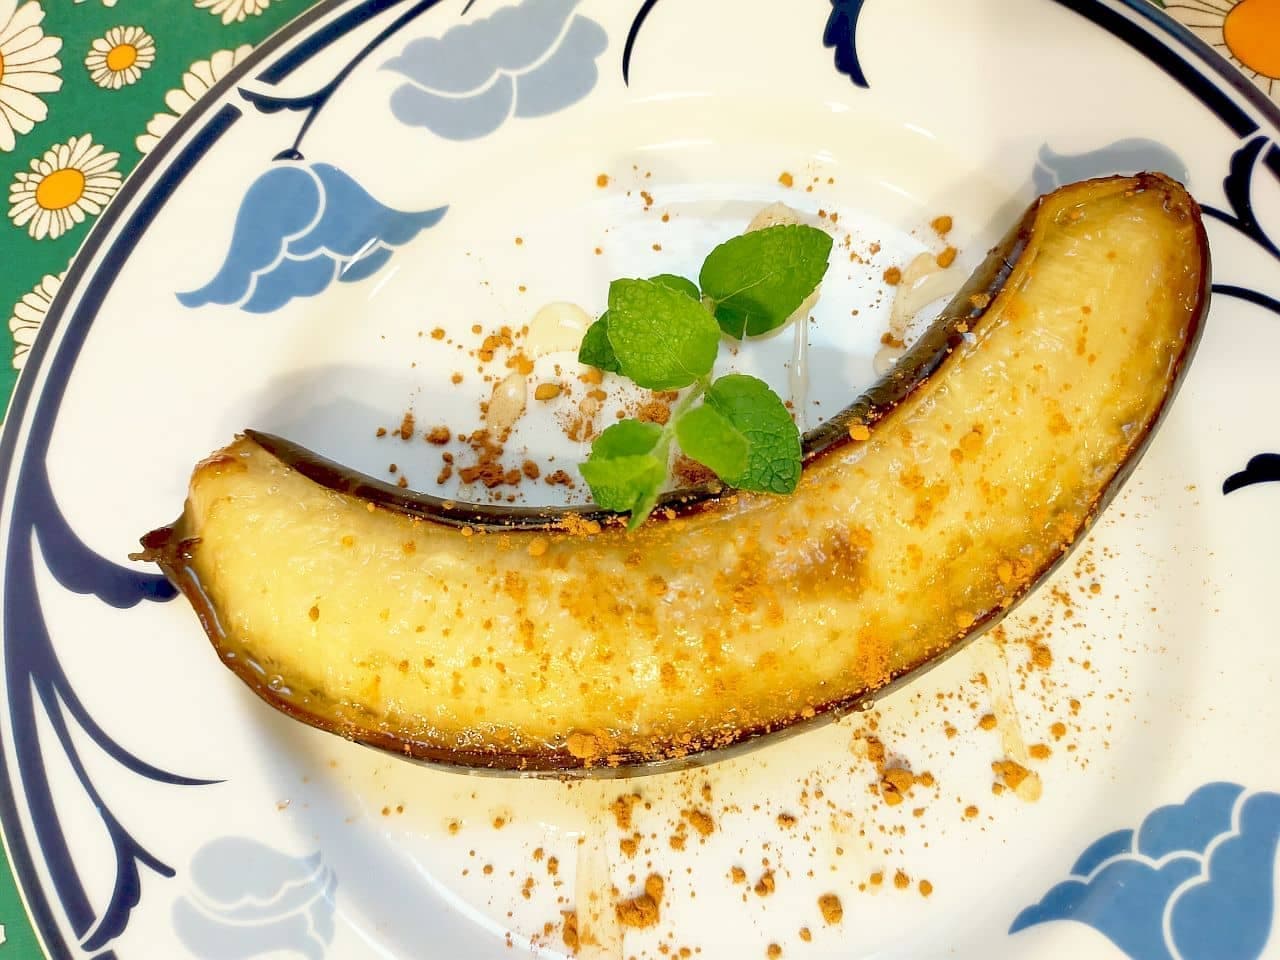 Super easy recipe of "baked banana with skin"